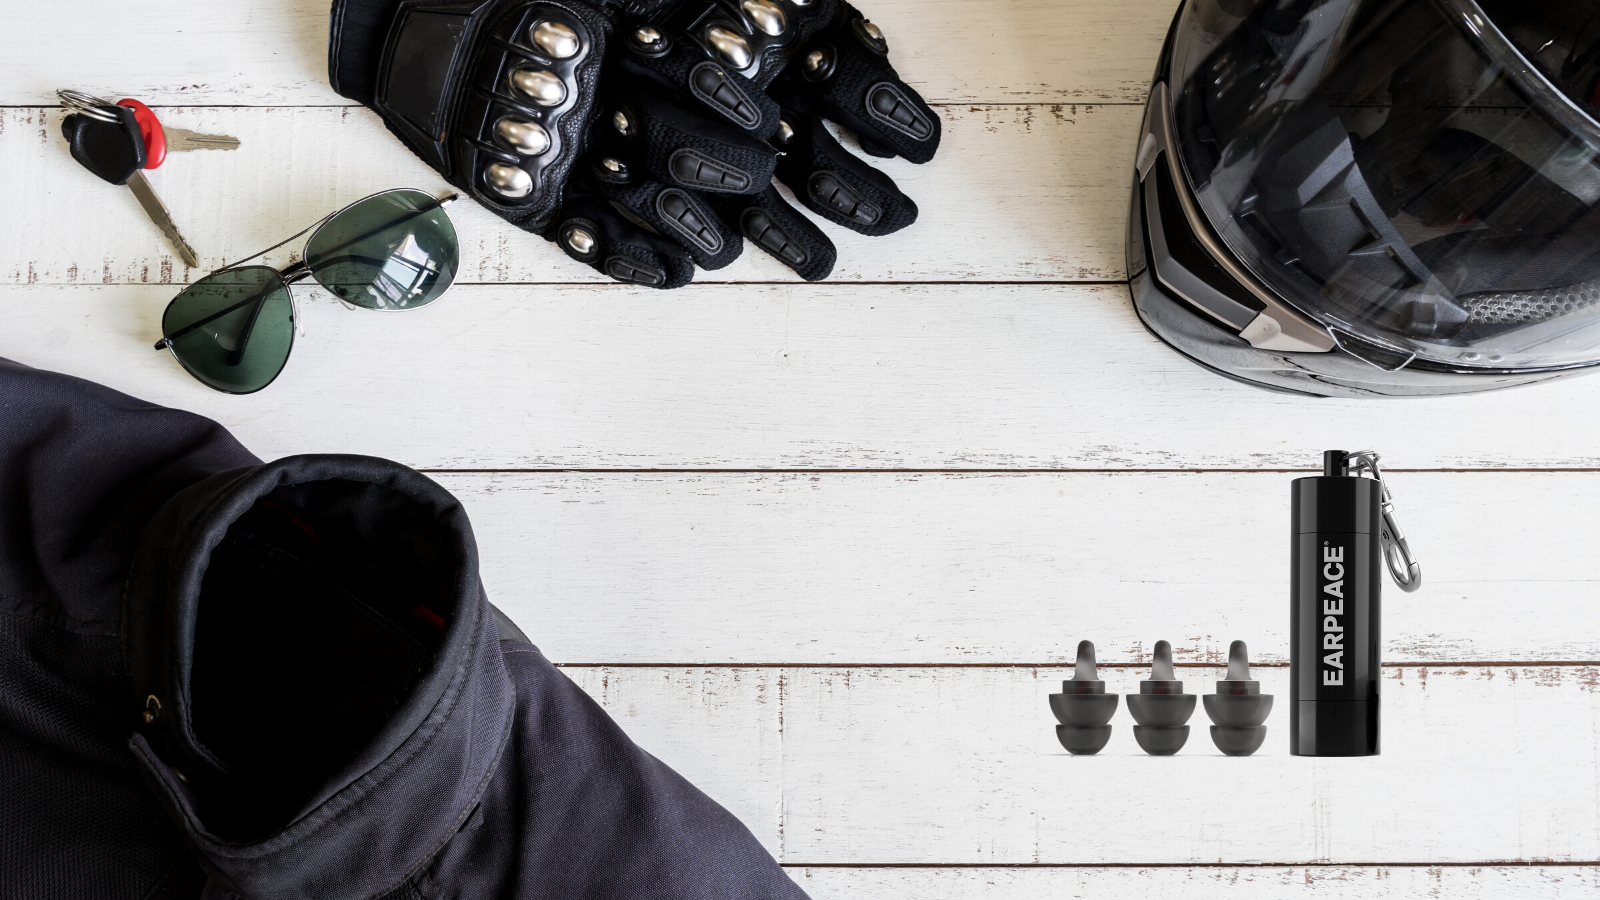 Motorcycle Safety Course 201 - 5 Types of Gear You Need Every Time You Ride